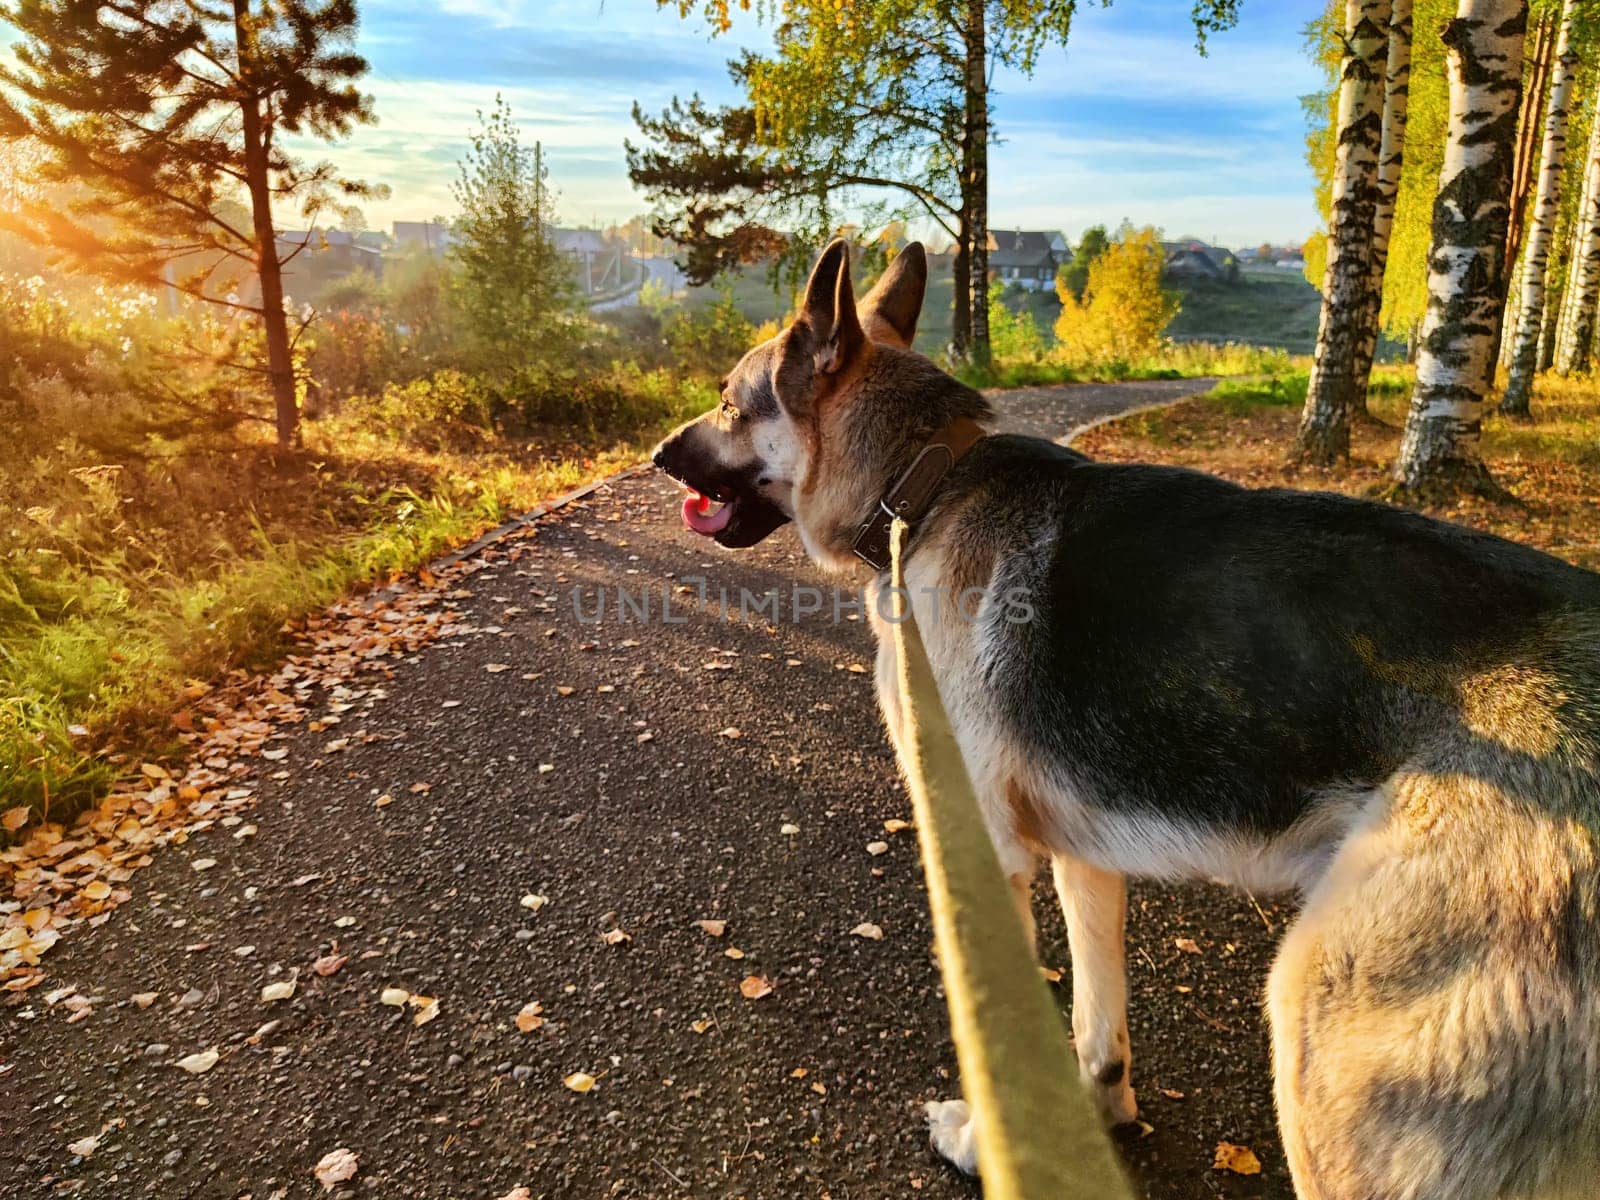 Dog German Shepherd in autumn day and green, yellow nature forest around. Waiting eastern European dog veo and colorful fall landscape in park with path